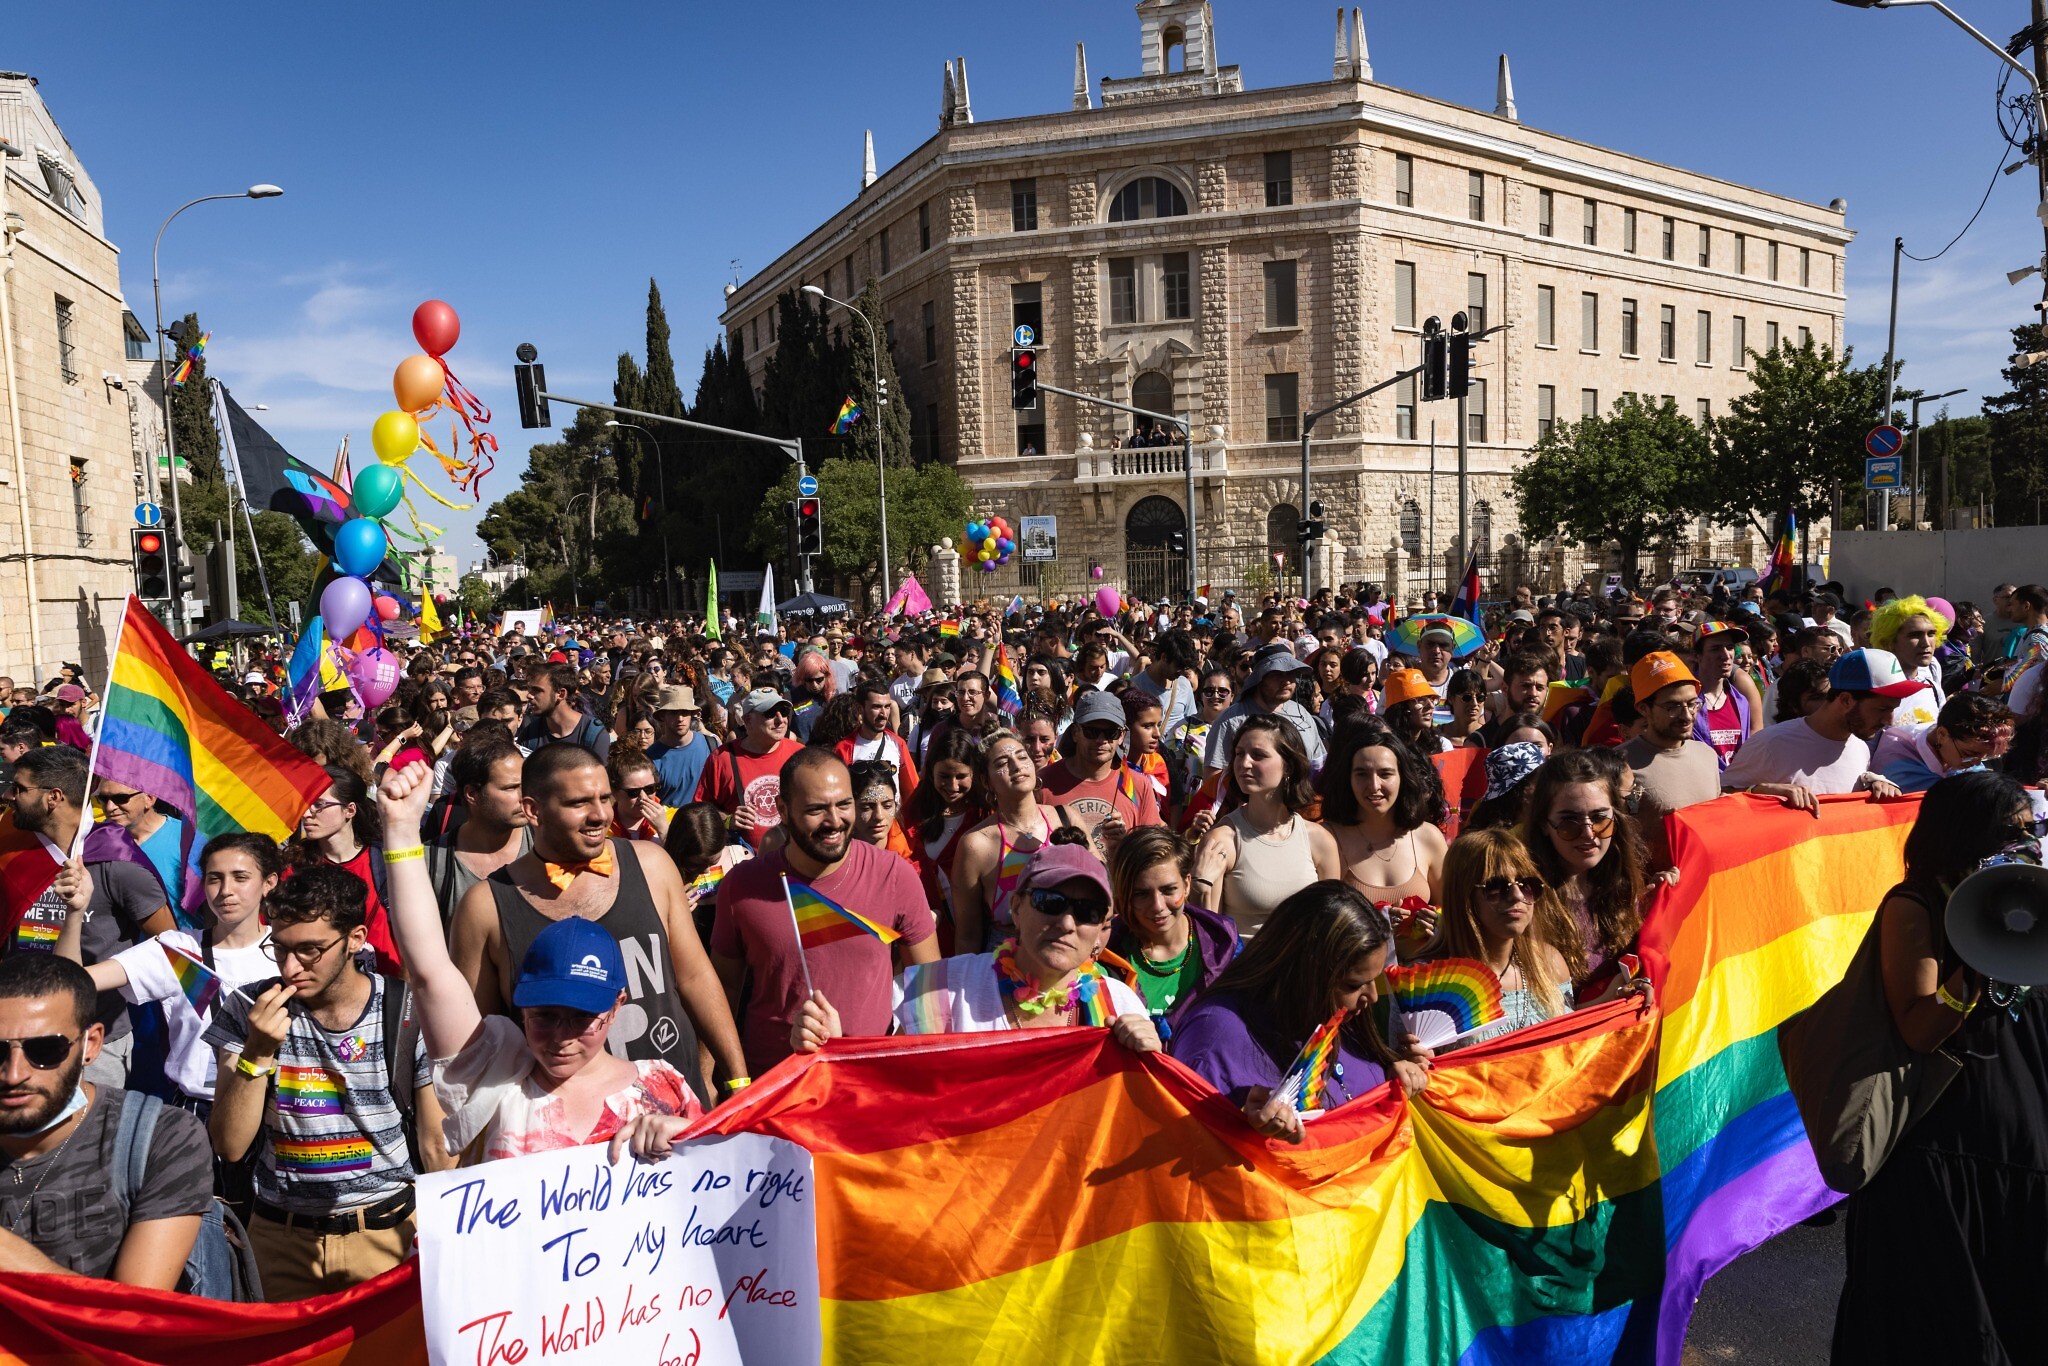 7,500 march in Jerusalem Pride Parade under heavy security The Times